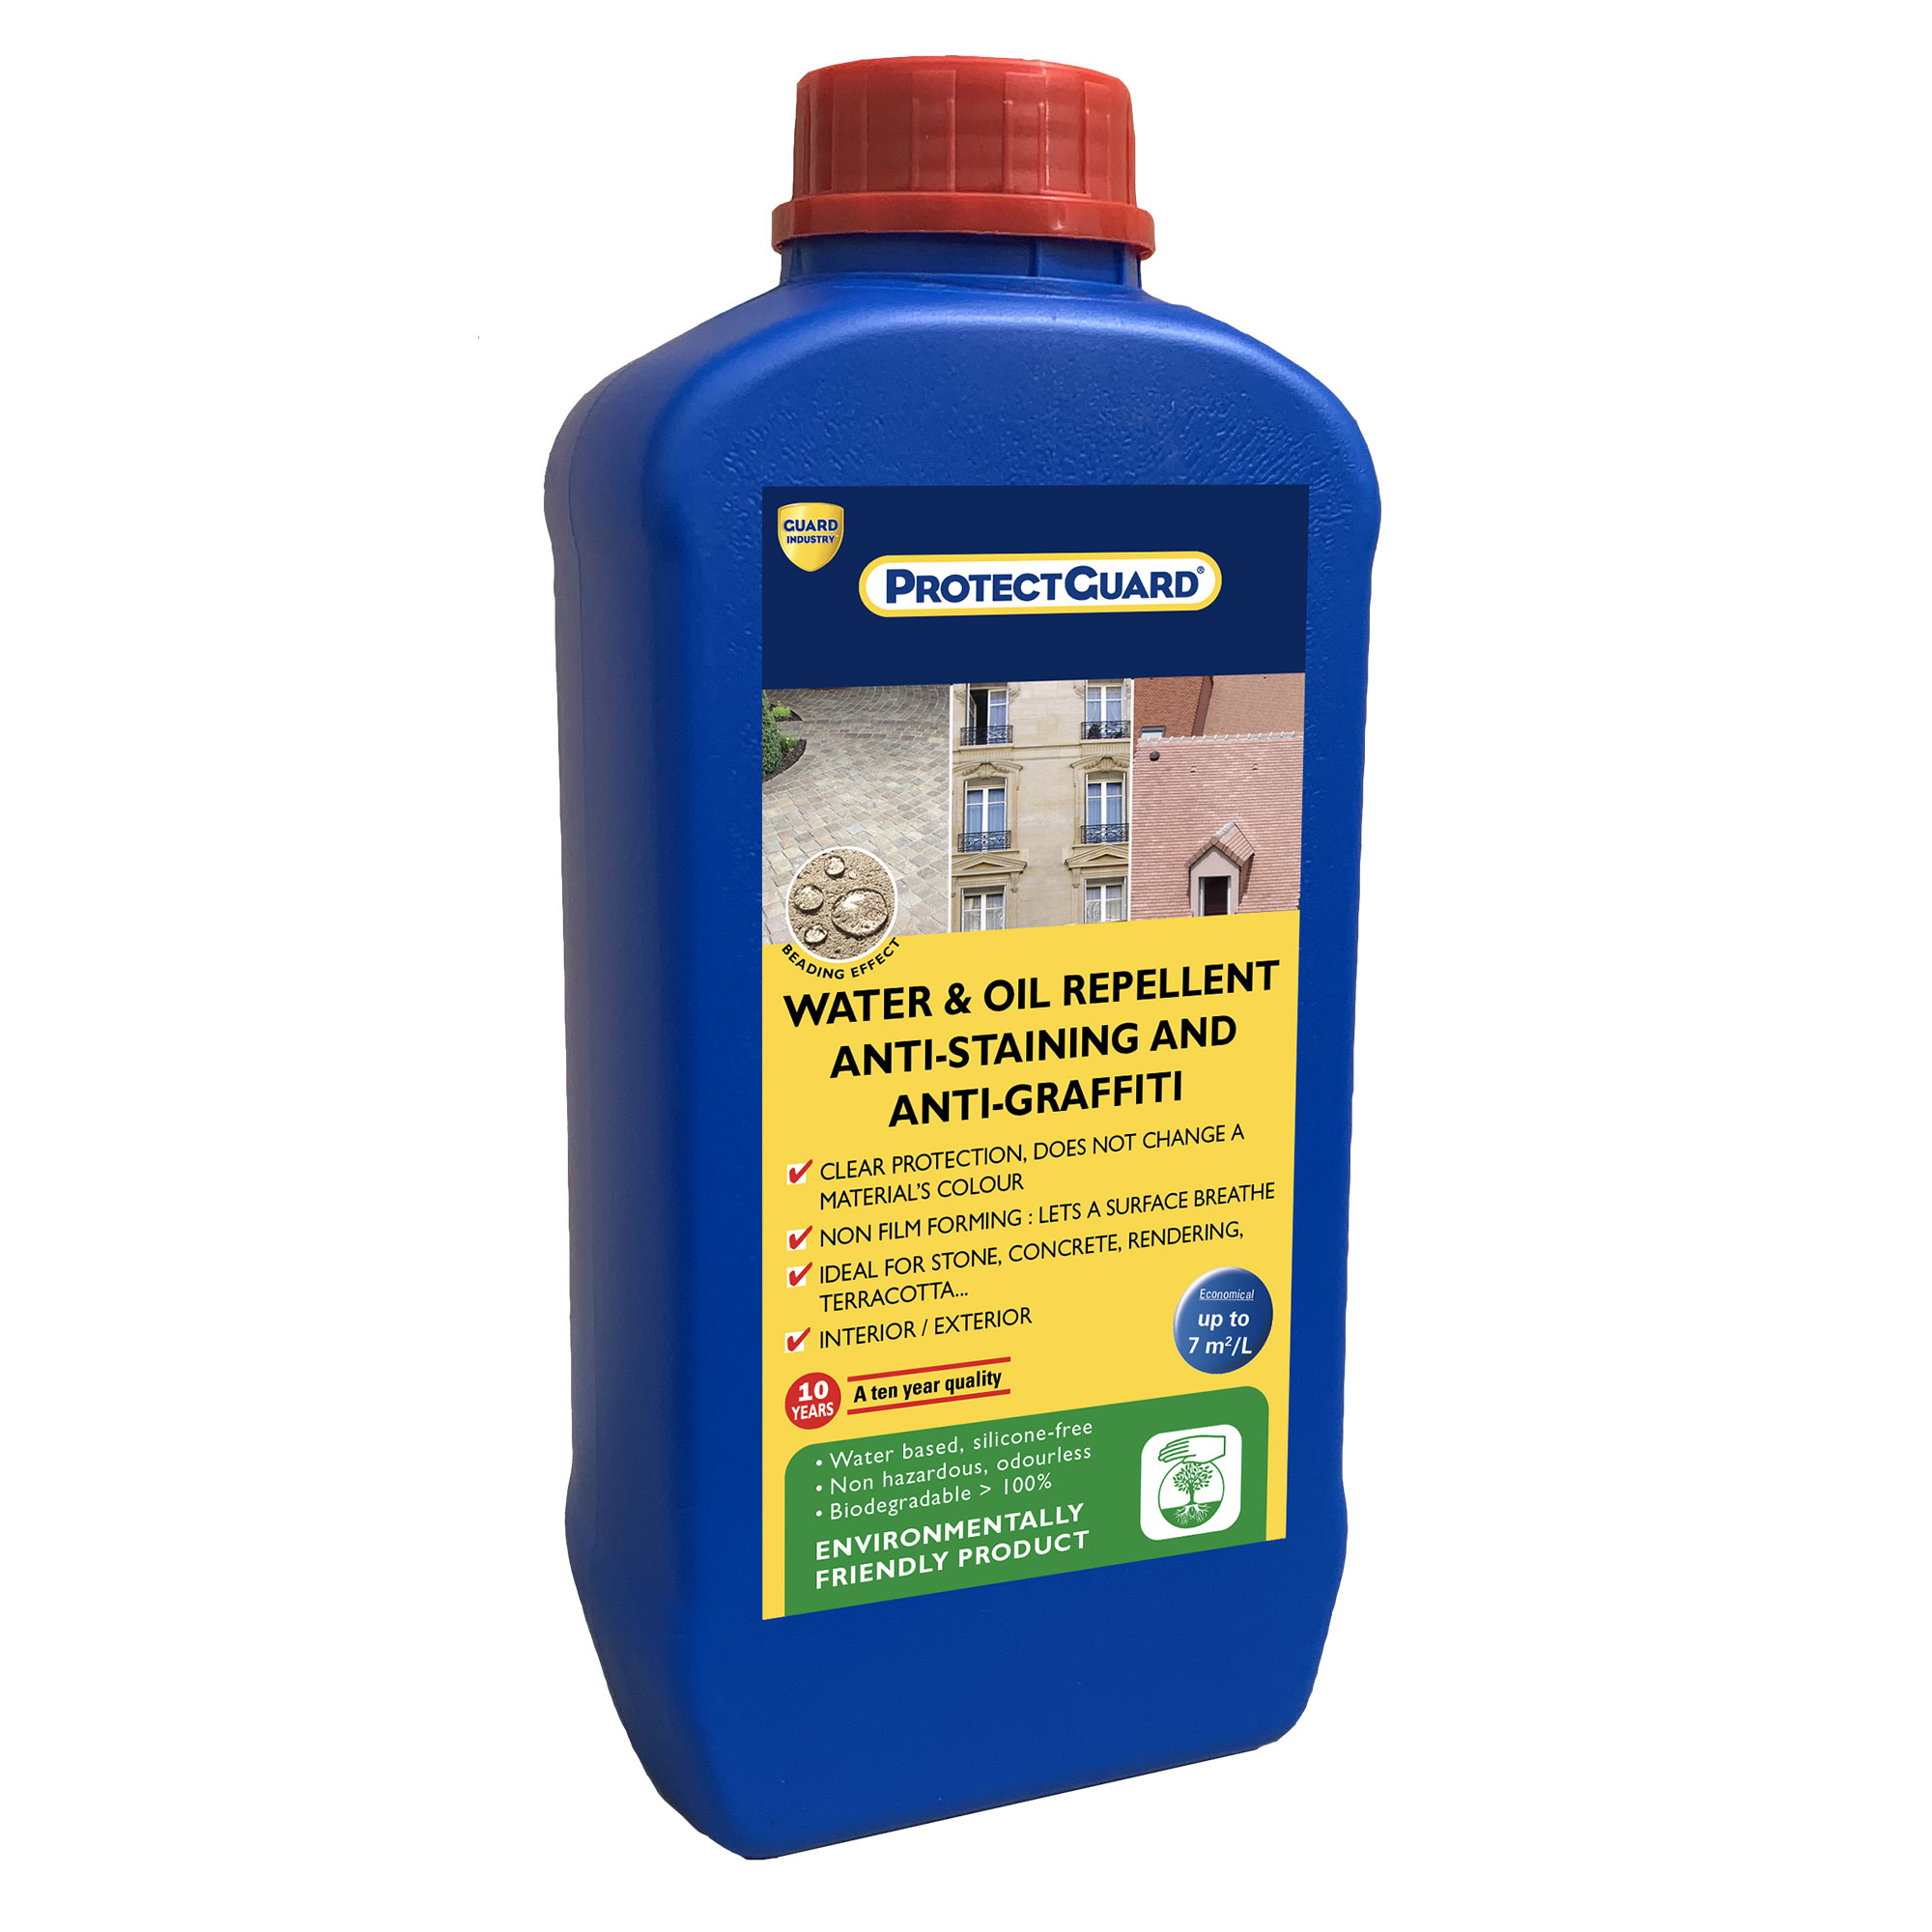 Protect Guard - Water and Oil Repellant Anti-Staining and Anti-Graffiti Solution 1L